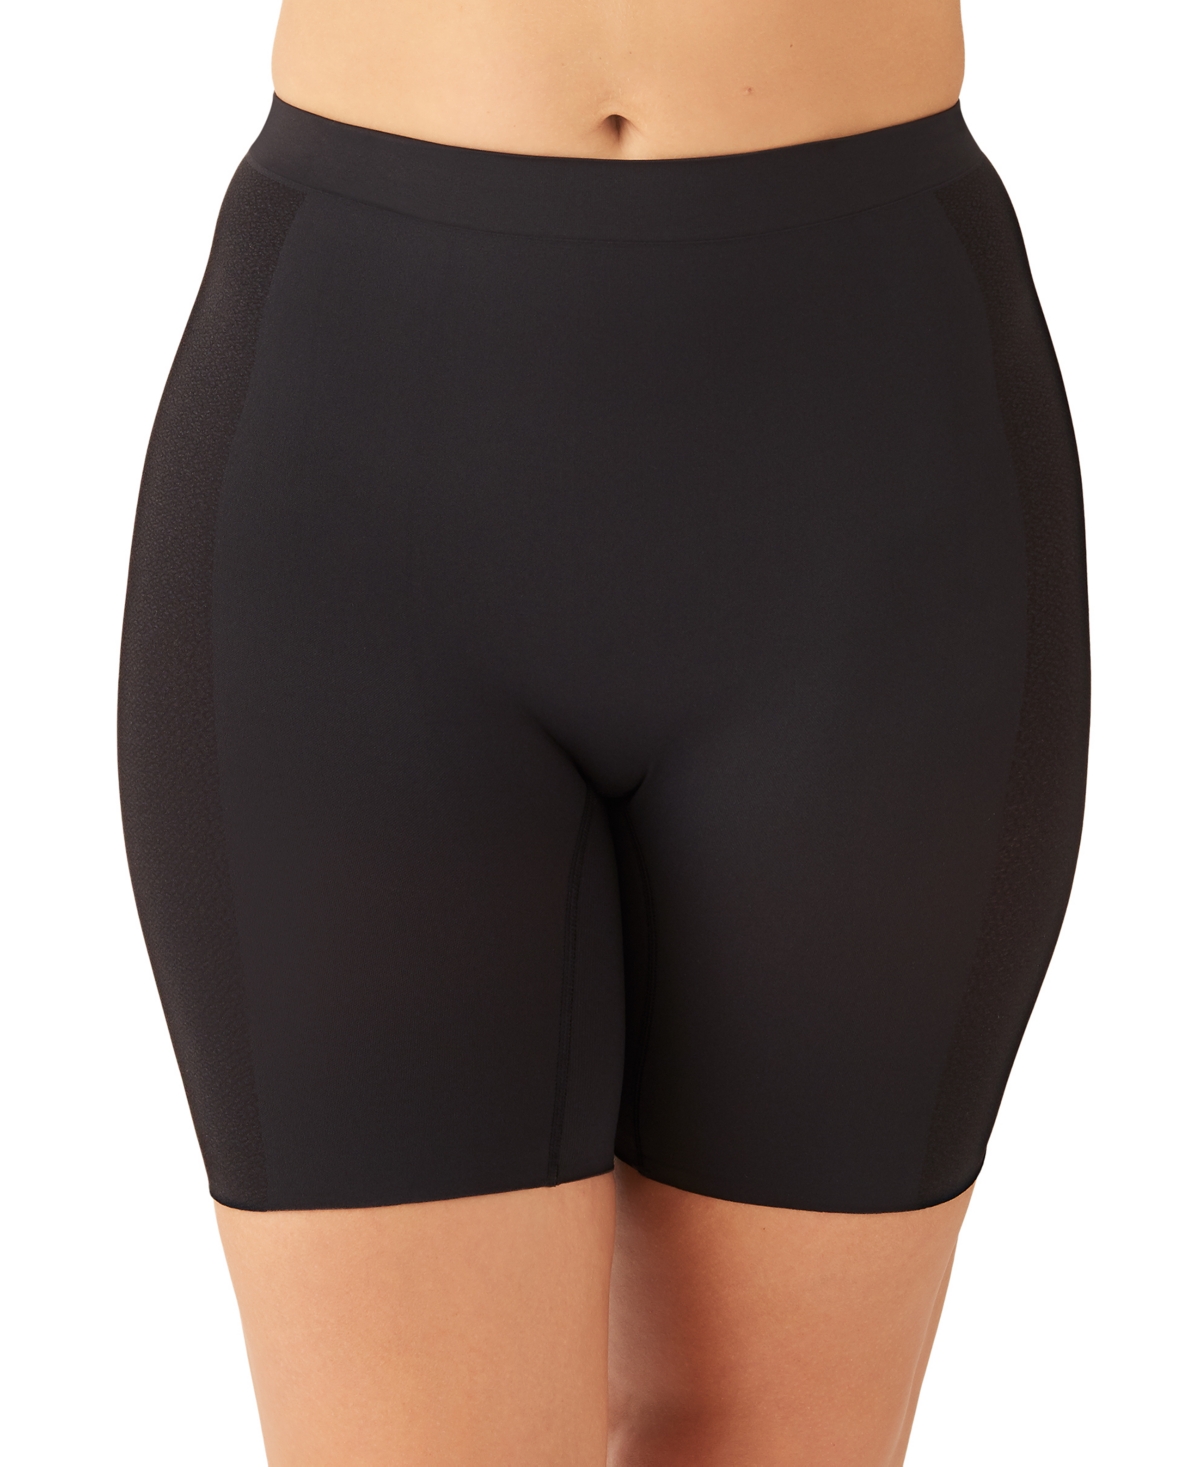 UPC 719544953245 product image for Wacoal Women's Keep Your Cool Thigh Shaper 805378 | upcitemdb.com